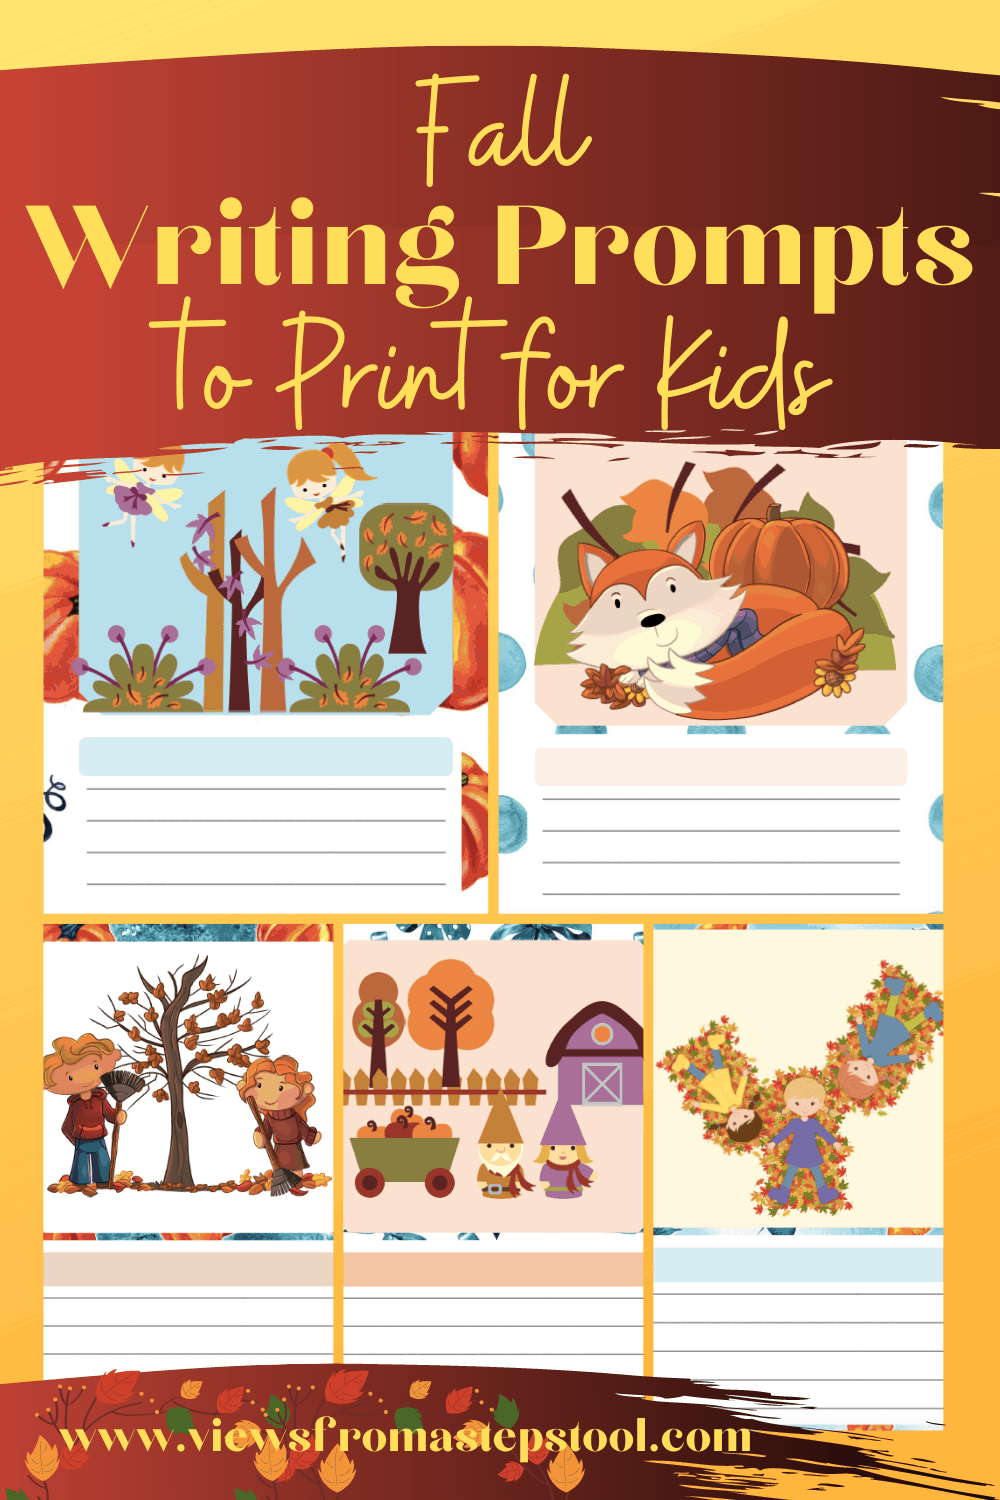 Fall Writing Prompts Printable Pages for Kids